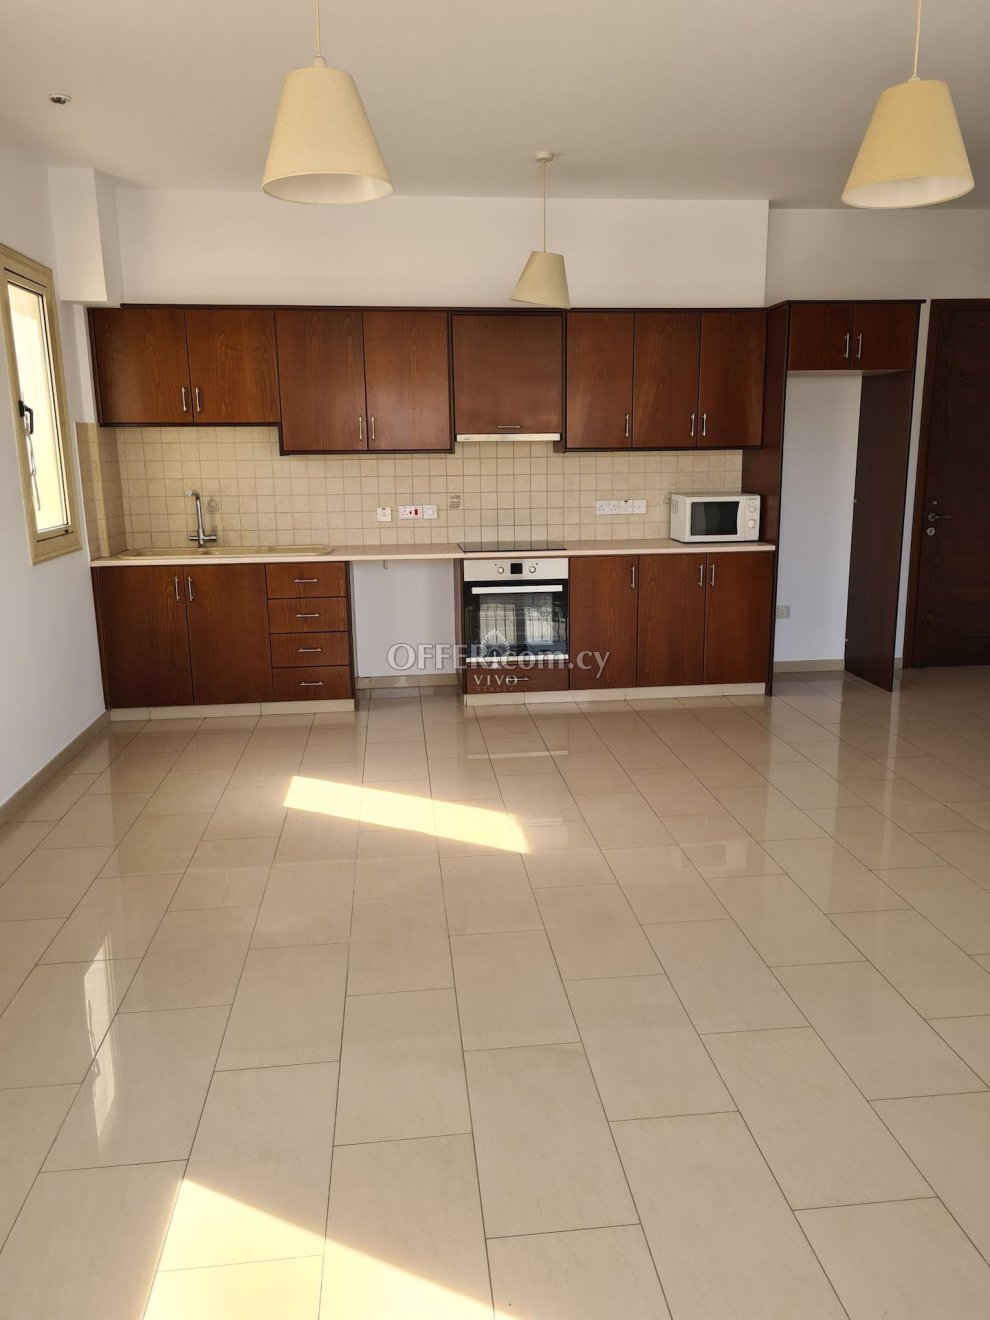 SPACIOUS 2 BEDROOM APARTMENT IN THE CITY CENTER - 1